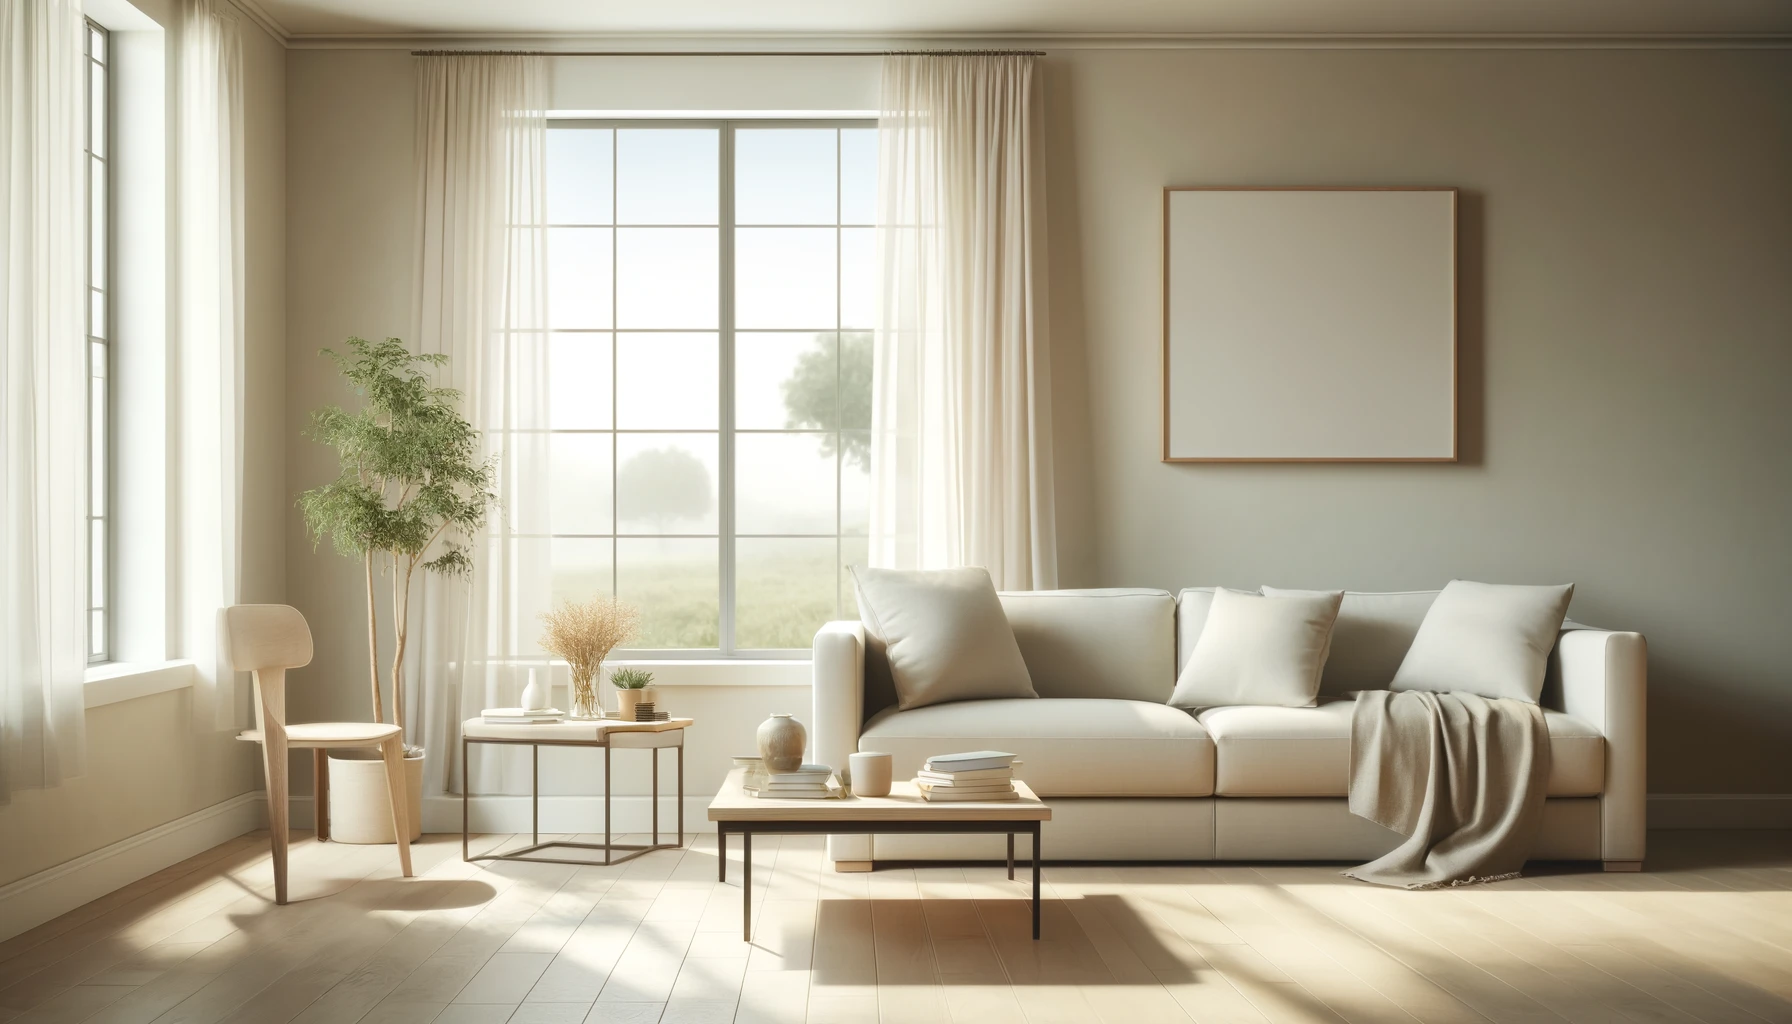 A minimalist and serene living room with light-colored walls, a cozy sofa, a coffee table, and natural lighting.